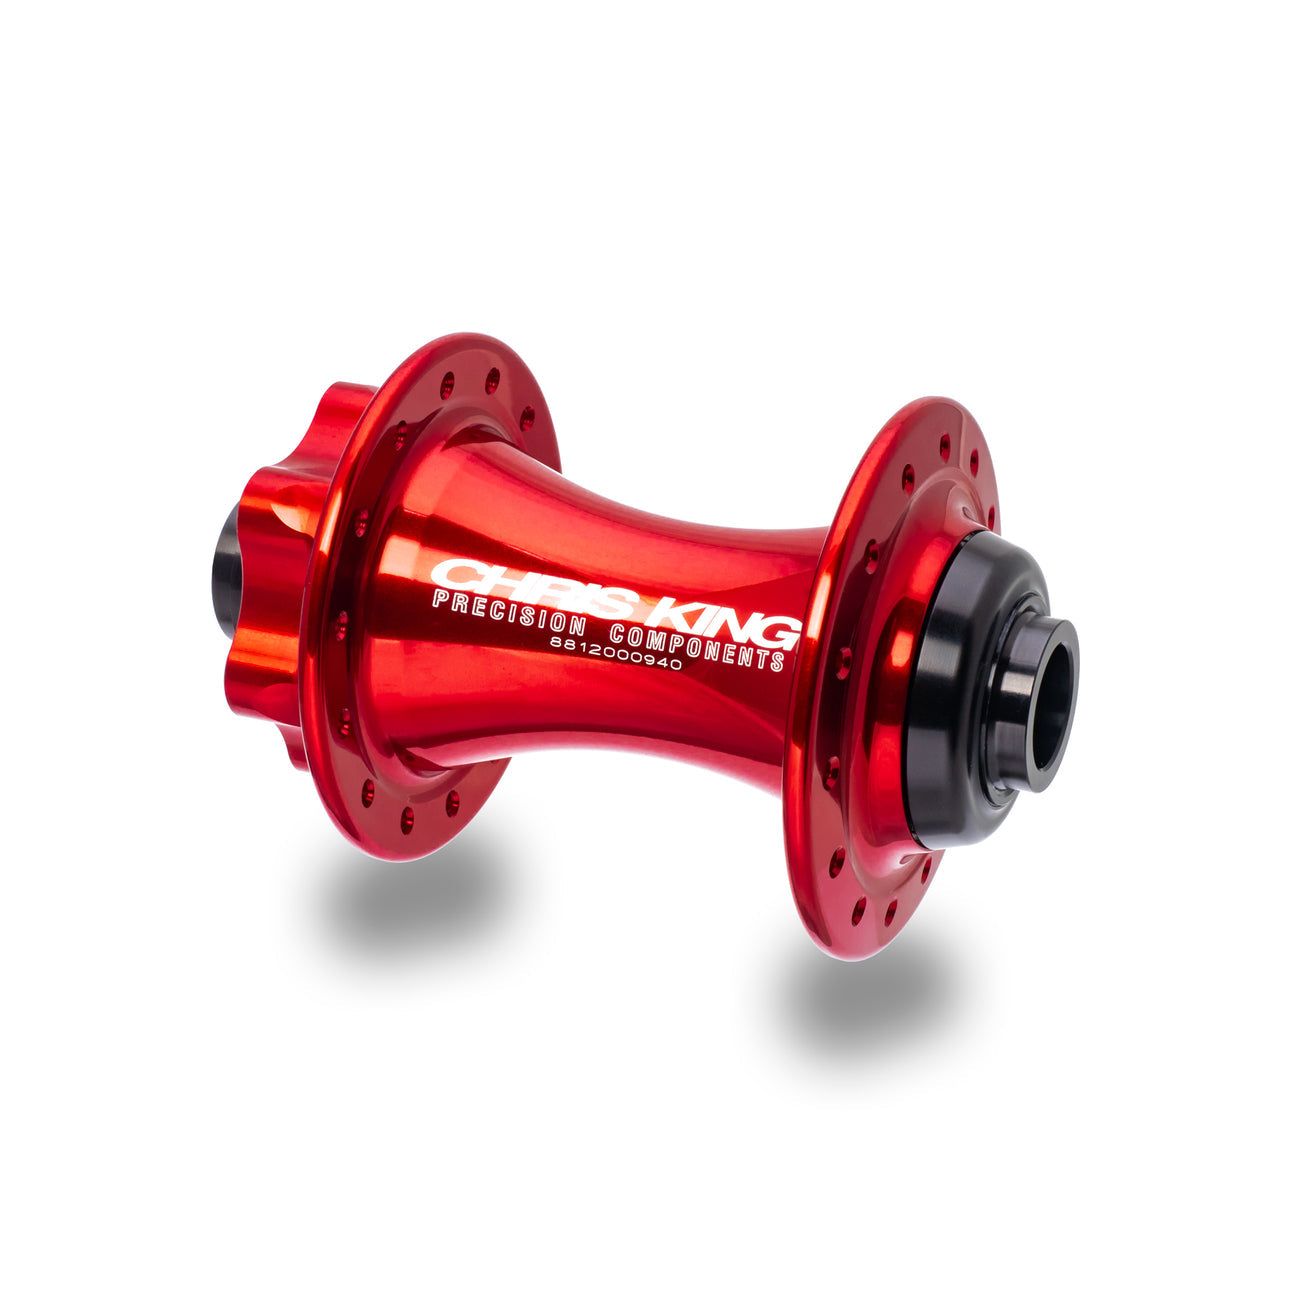 Chris King DH 6 bolt in red